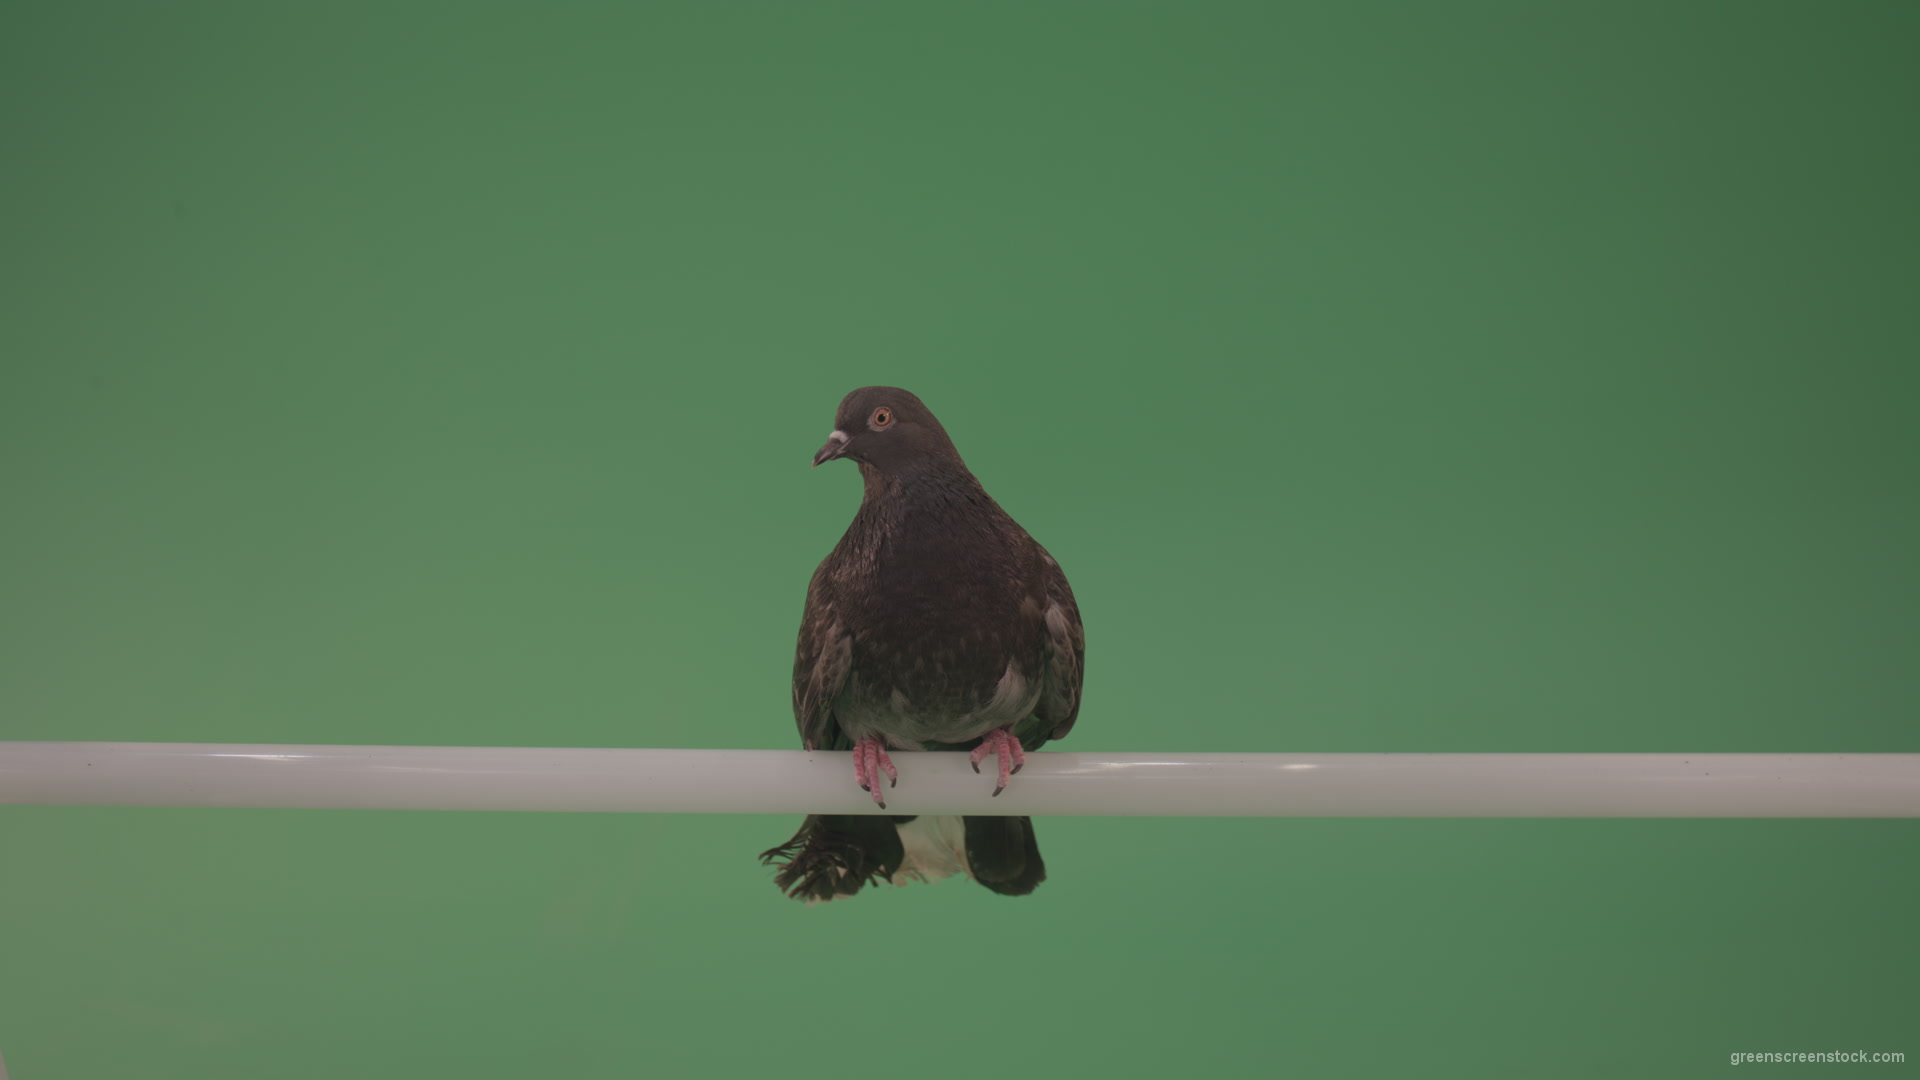 Wild-bird-doves-sit-on-the-branch-and-peer-around-isolated-on-green-screen_004 Green Screen Stock